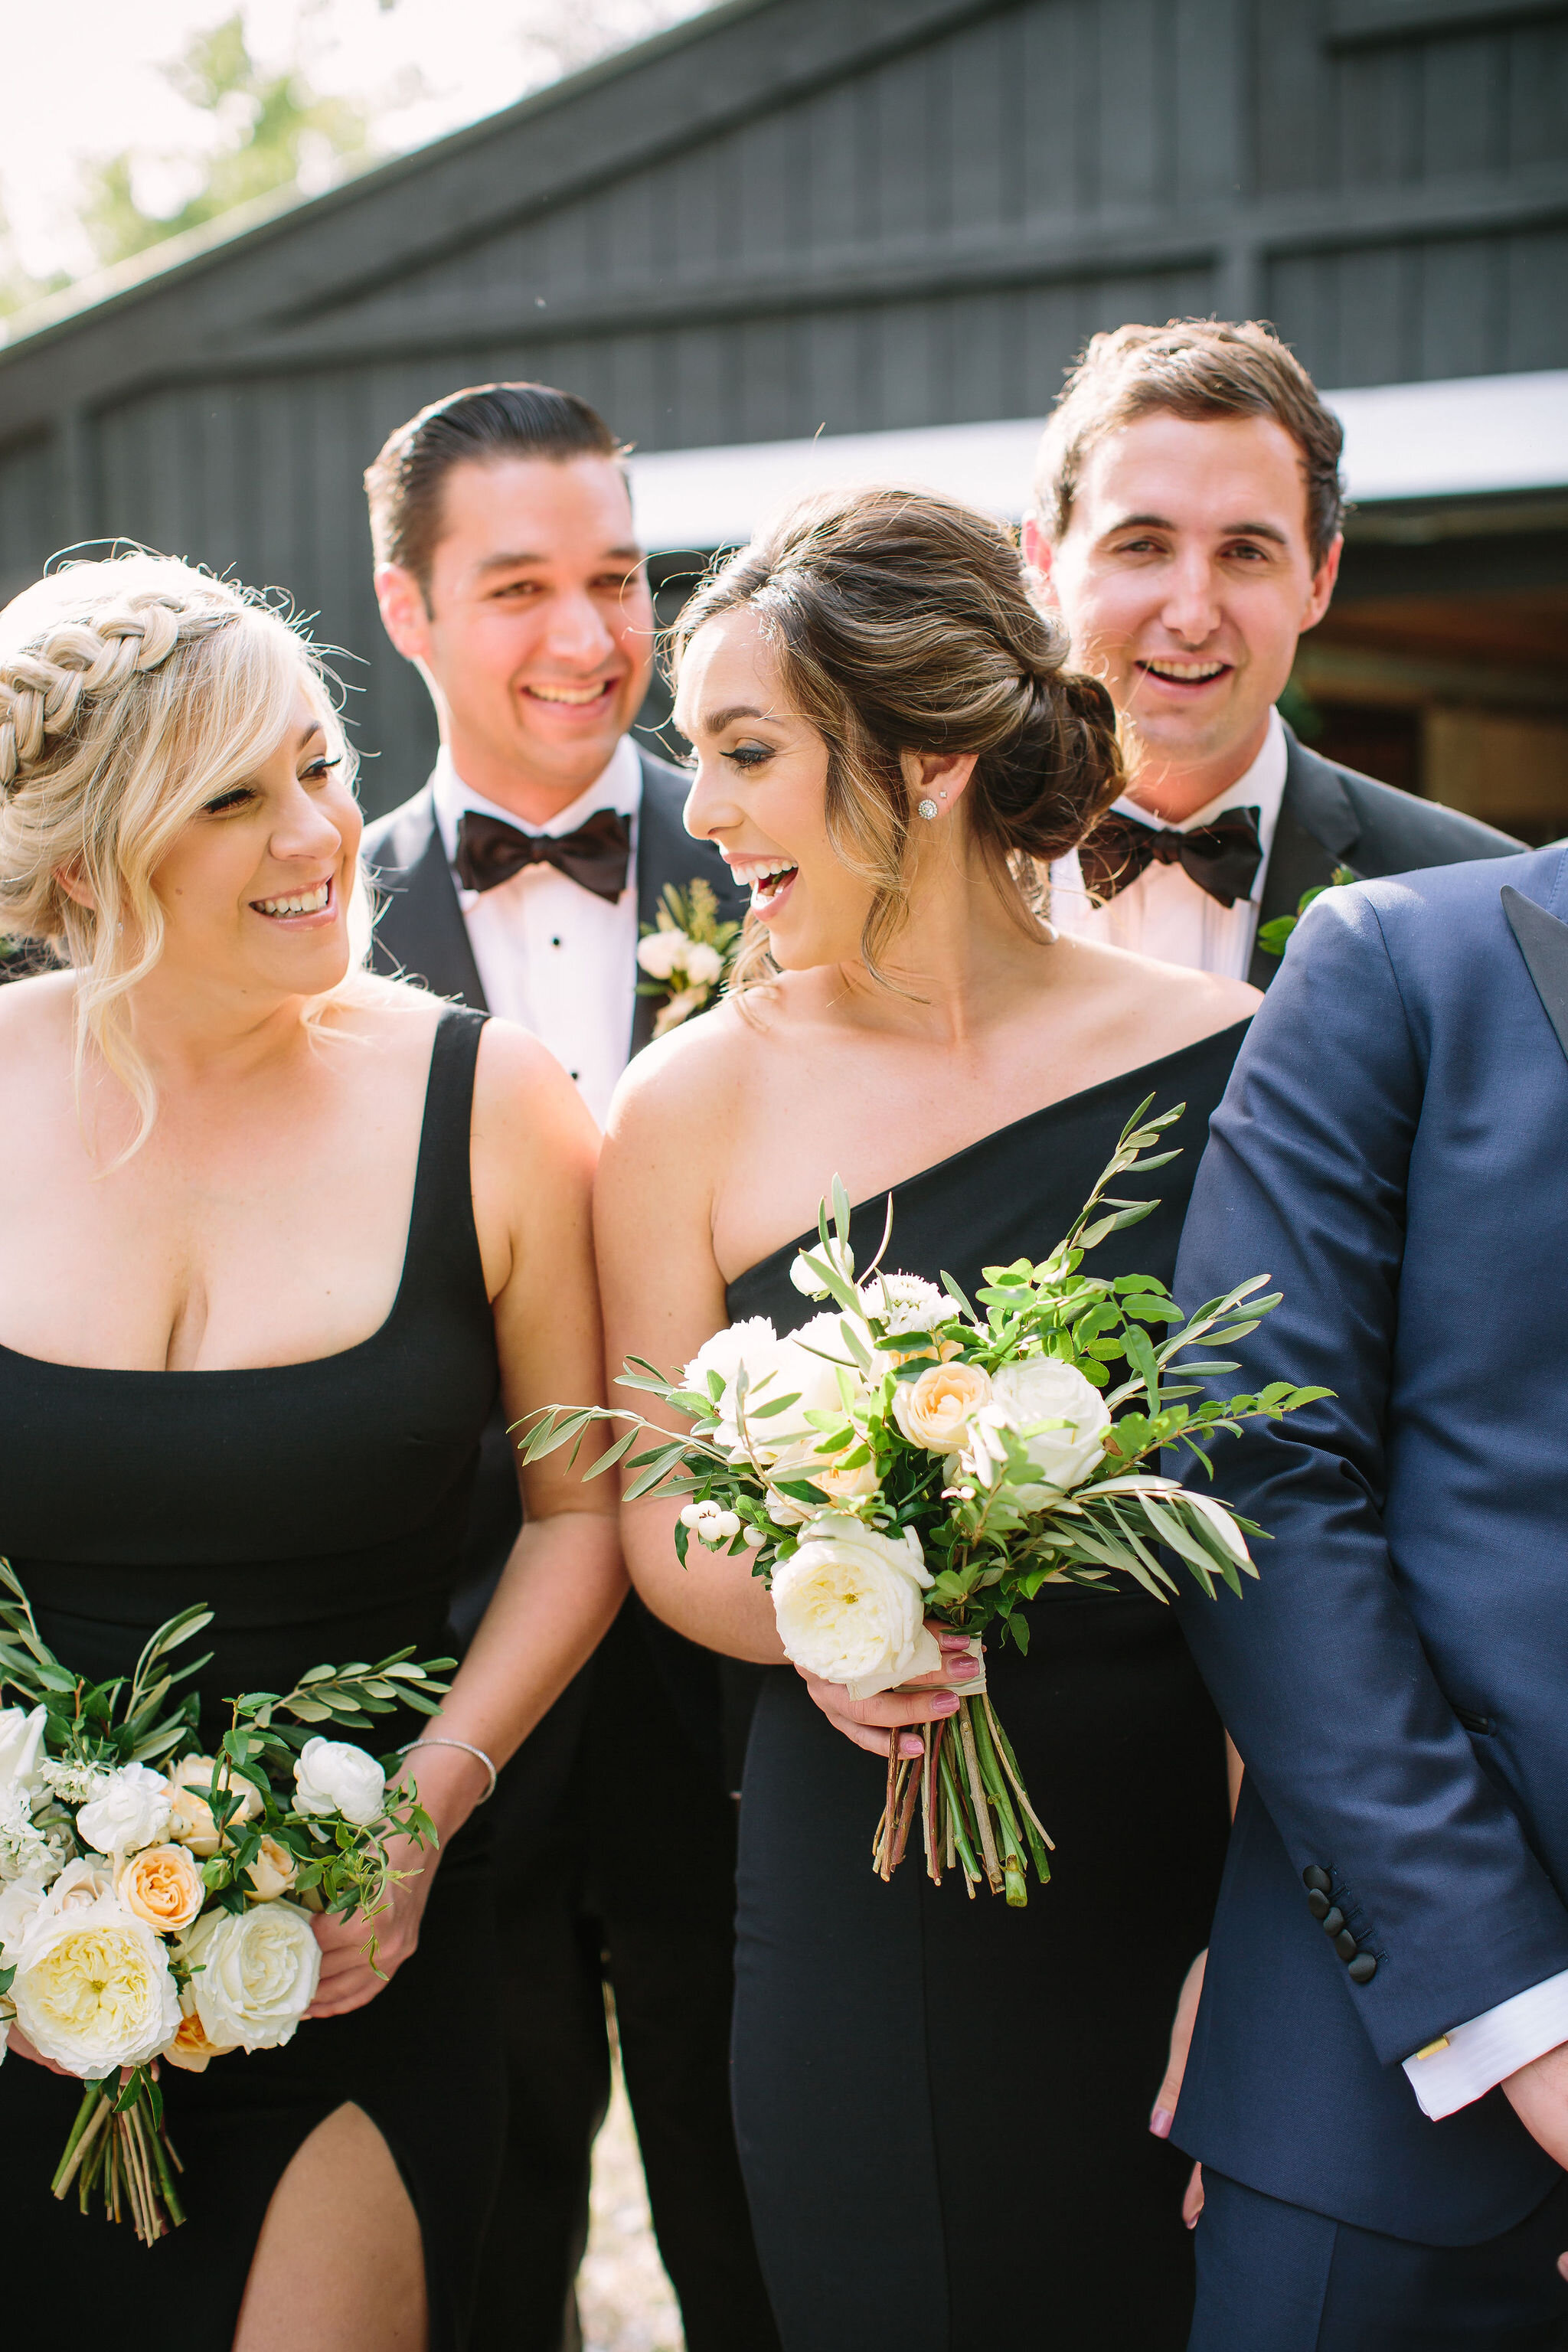 Black bridesmaid dresses with all white and greenery bouquets. Nashville wedding florist at Bloomsberry Farm.